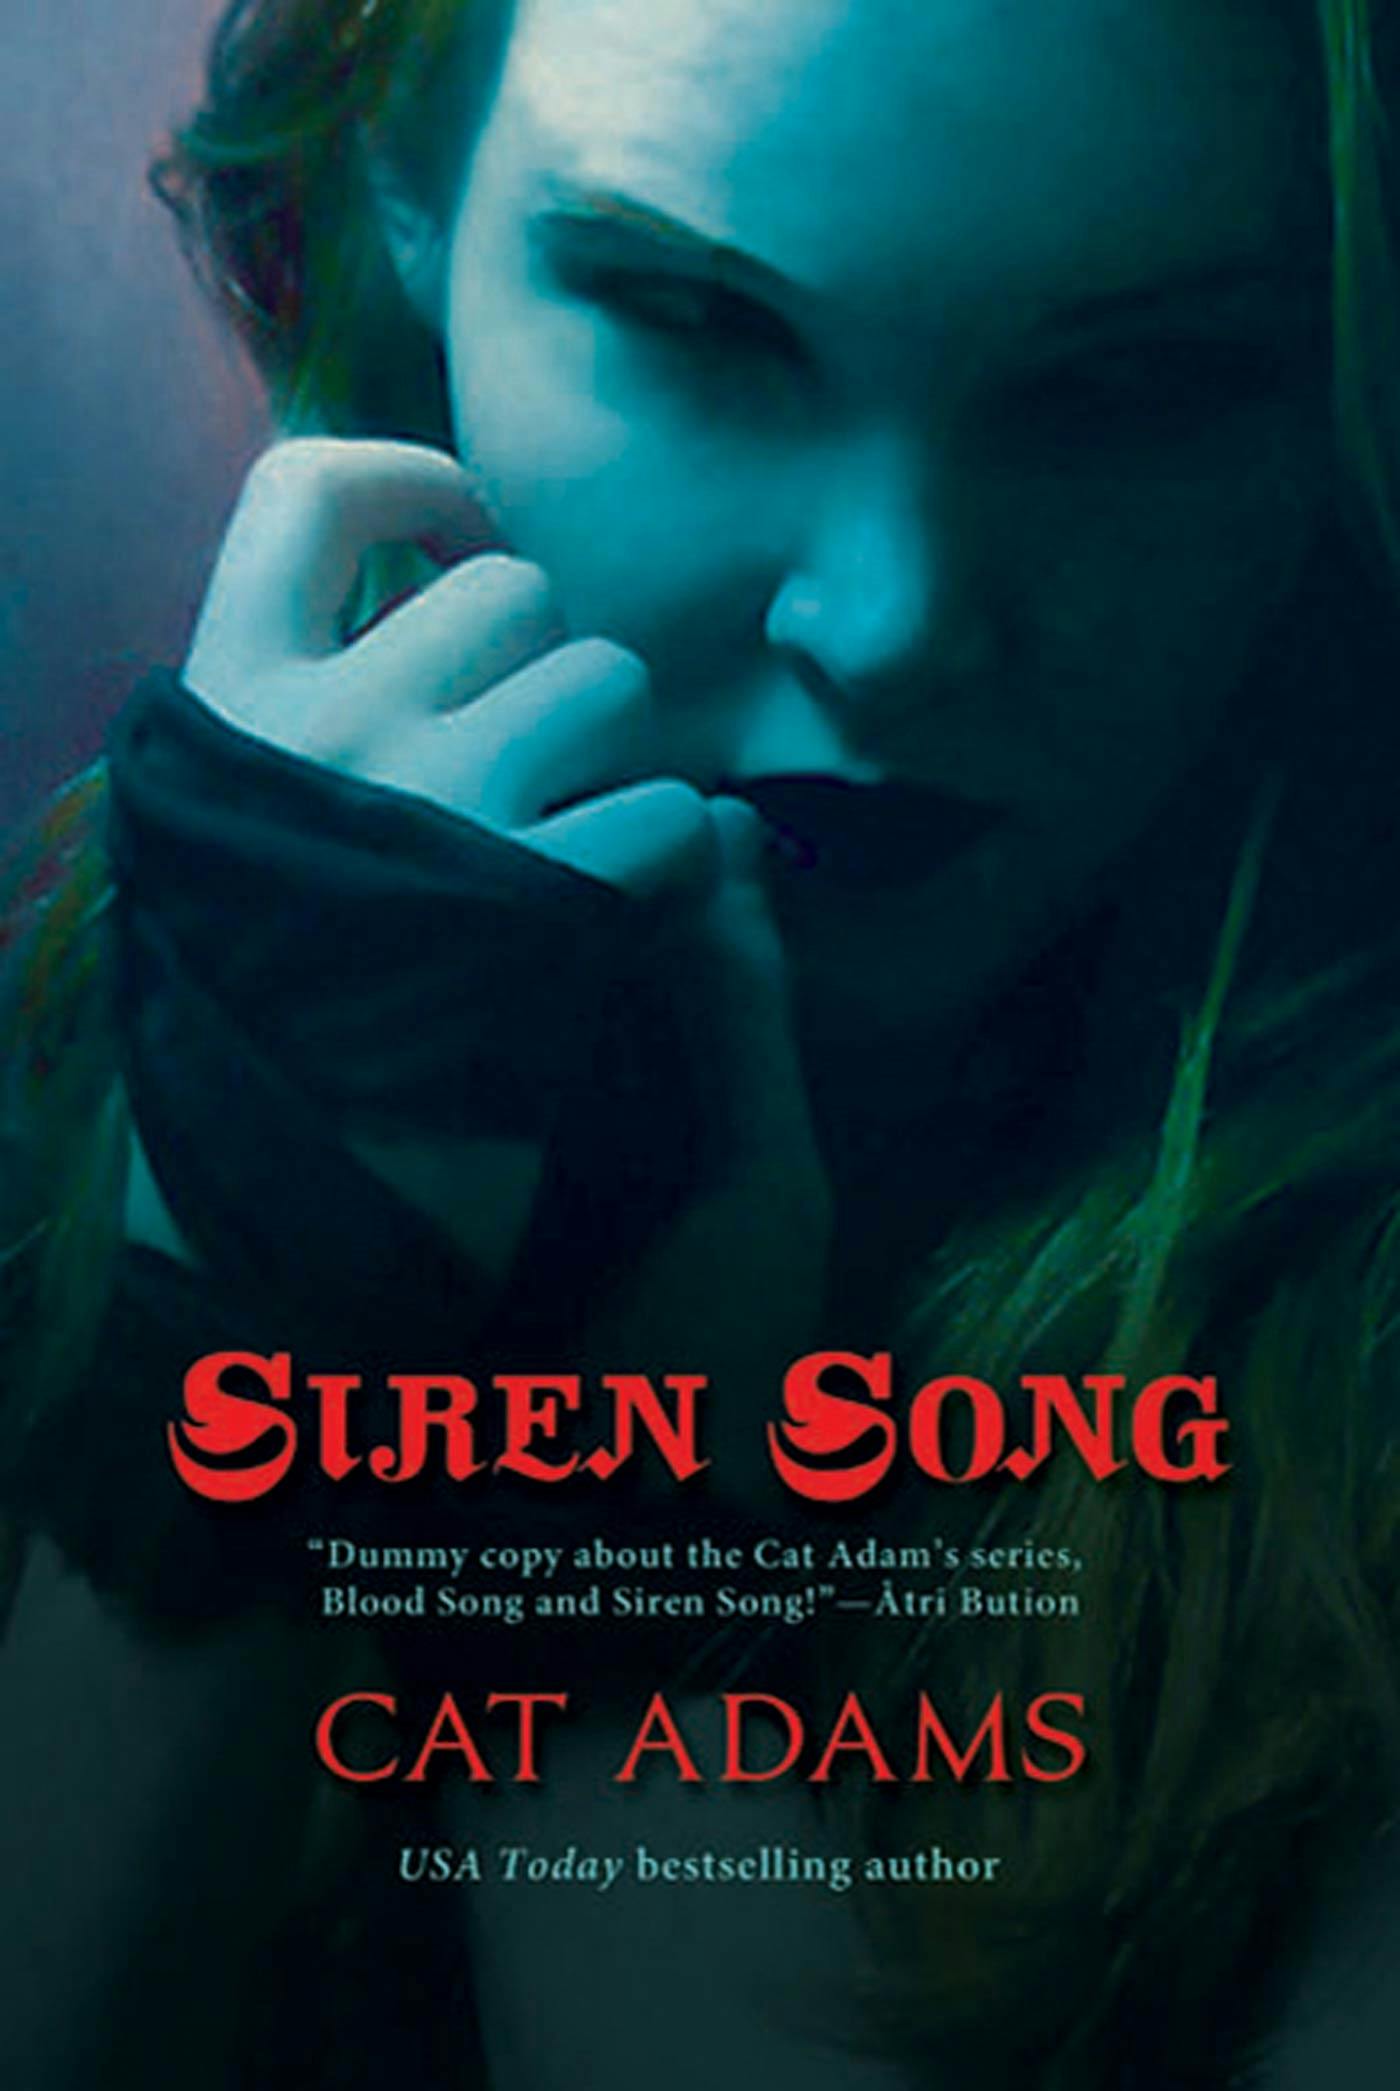 Cover for the book titled as: Siren Song